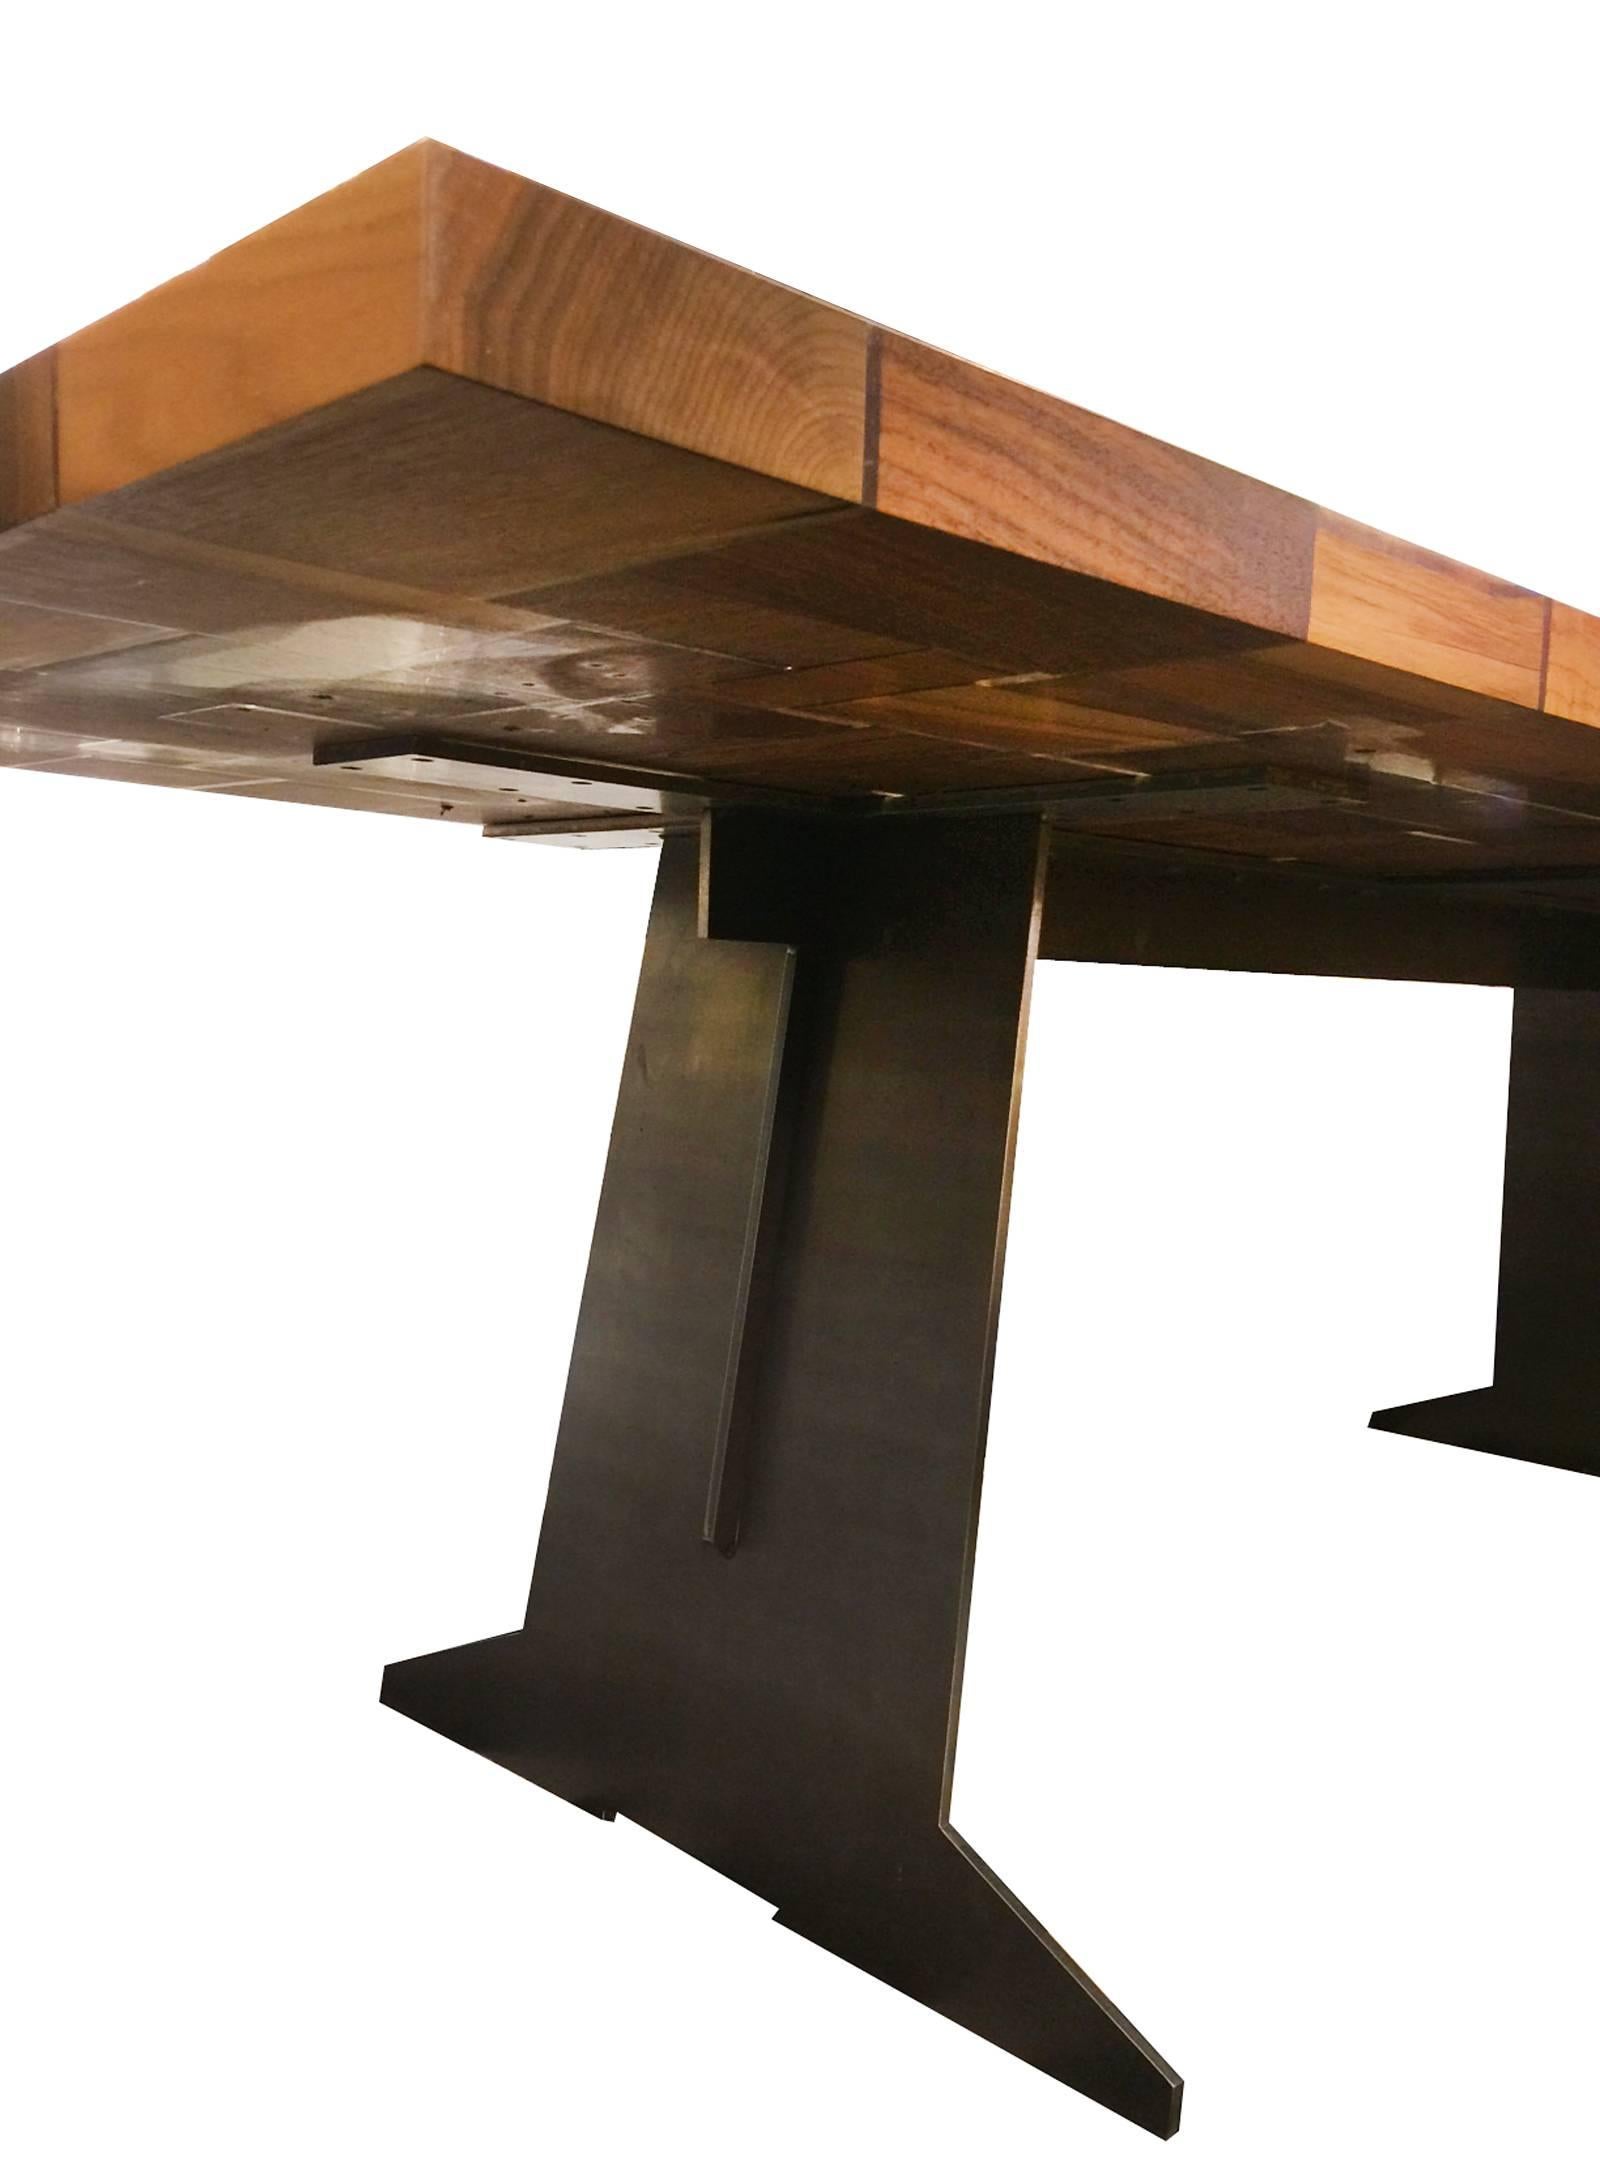 Hand-Crafted Square Wood Table Squared Blocks of Solid Wood Processed with Resin